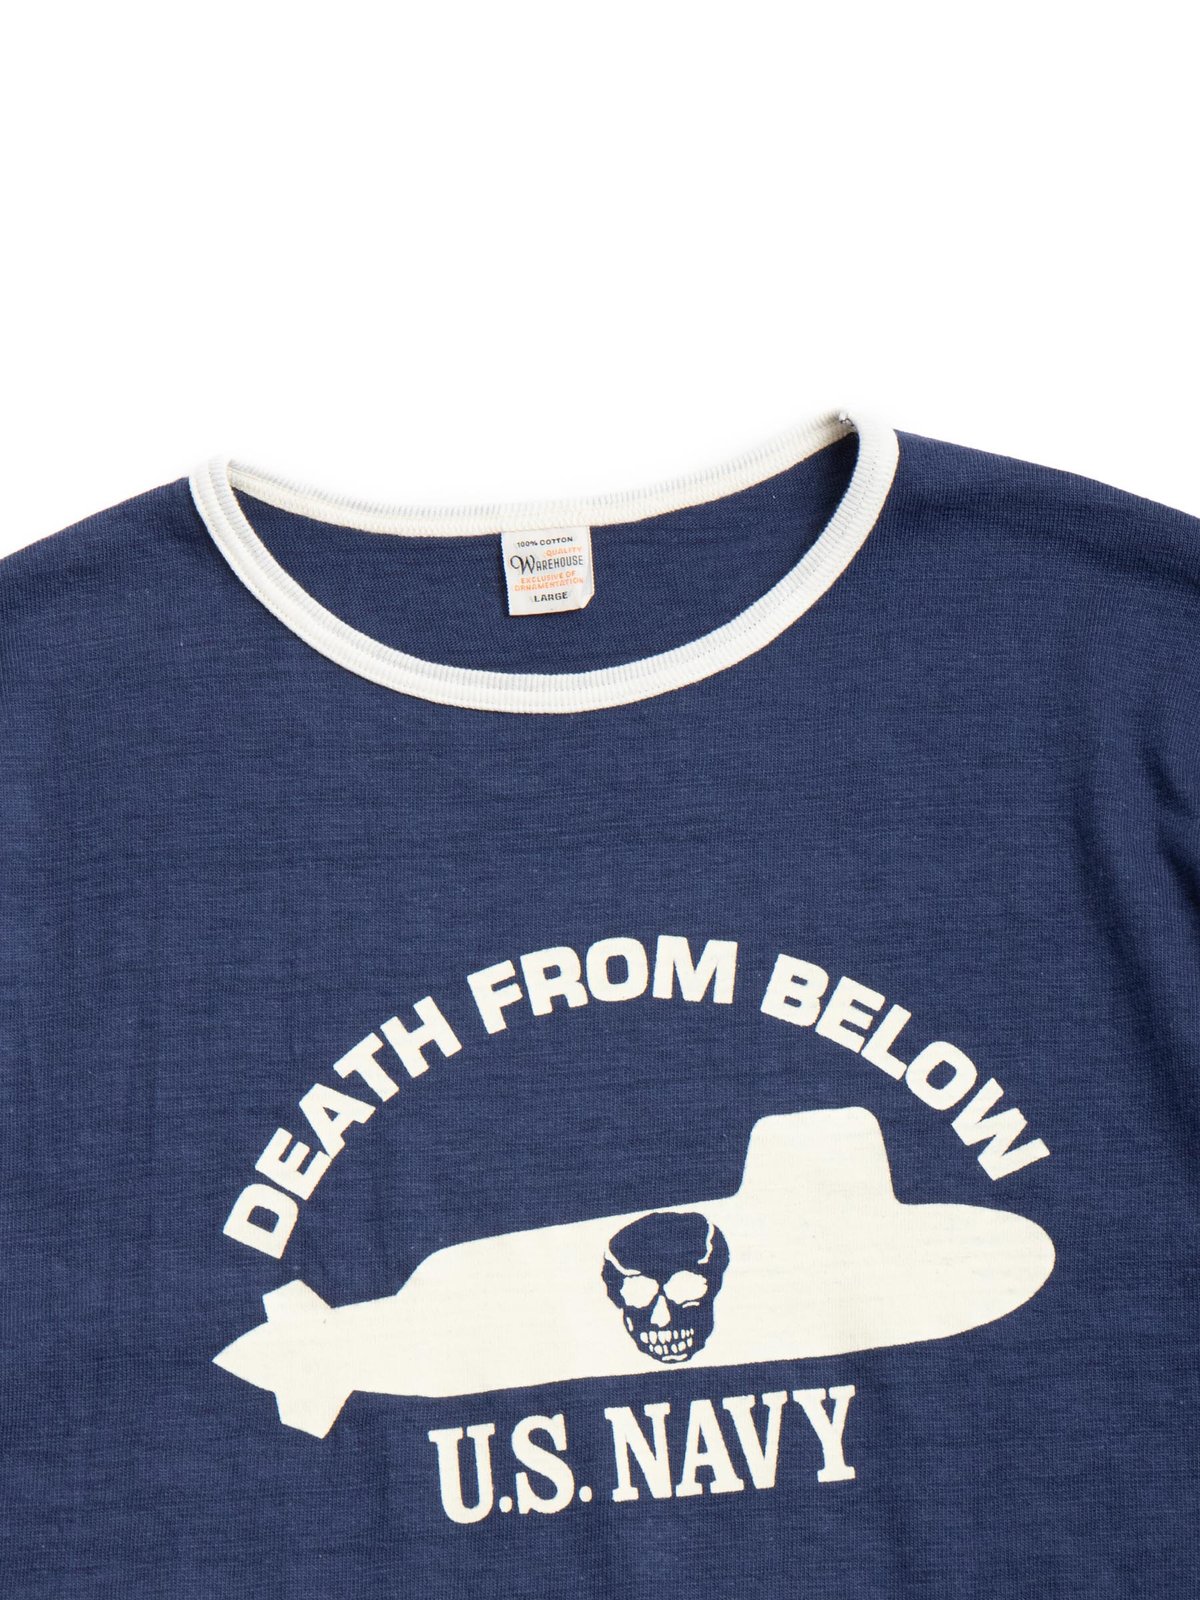 LOT 4059 DEATH FROM BELOW NAVY/CREAM - Image 2